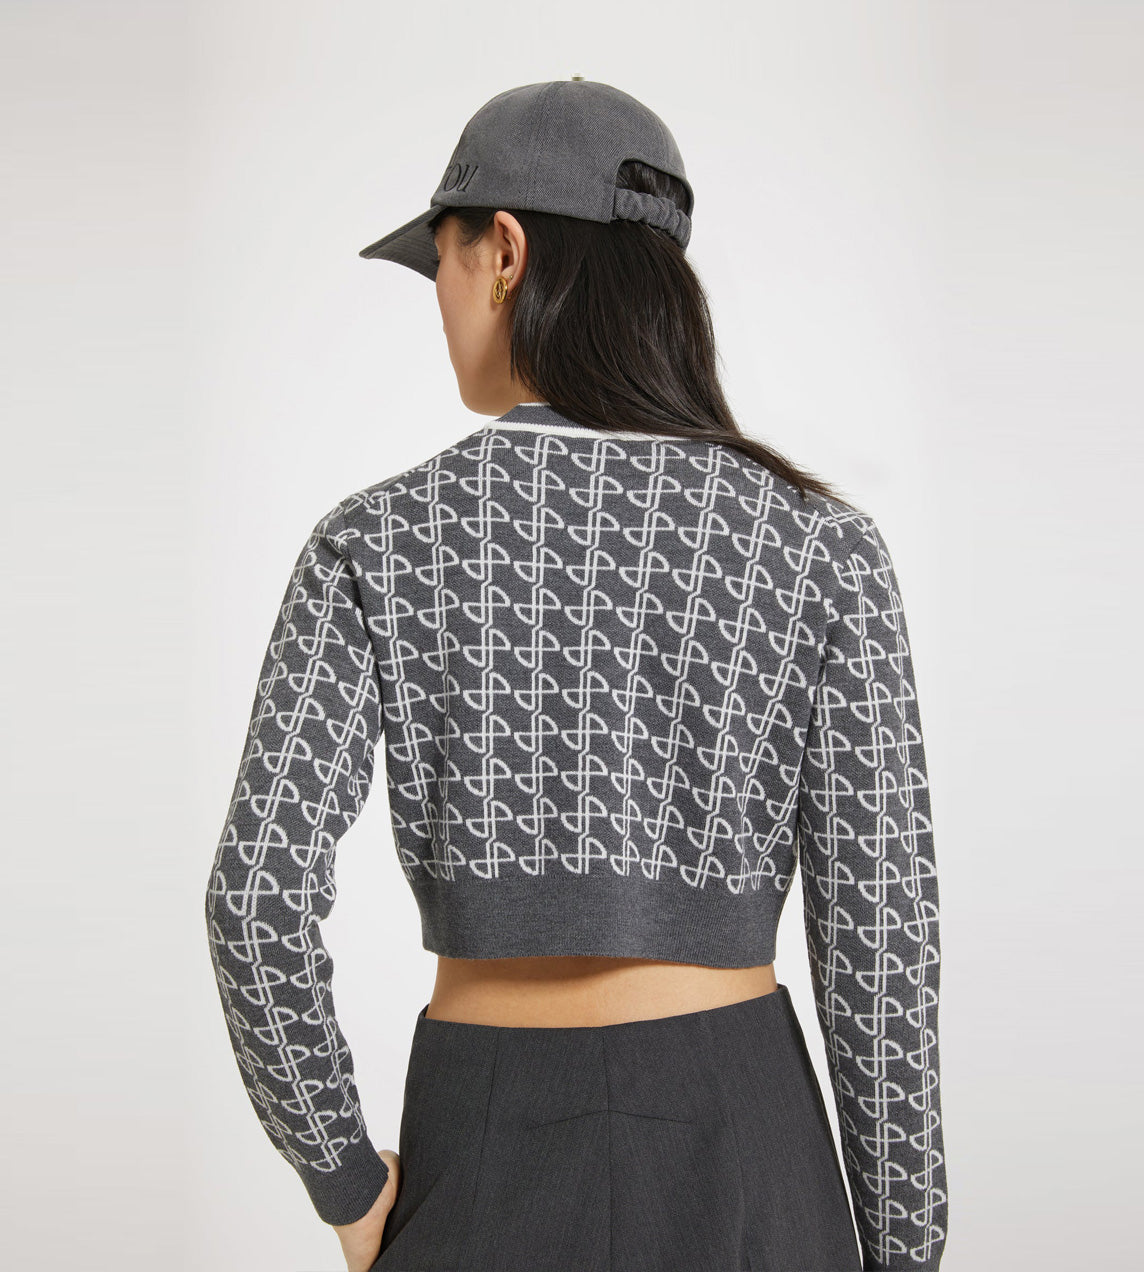 Patou - Cropped Jacquard Sweater Anthracite